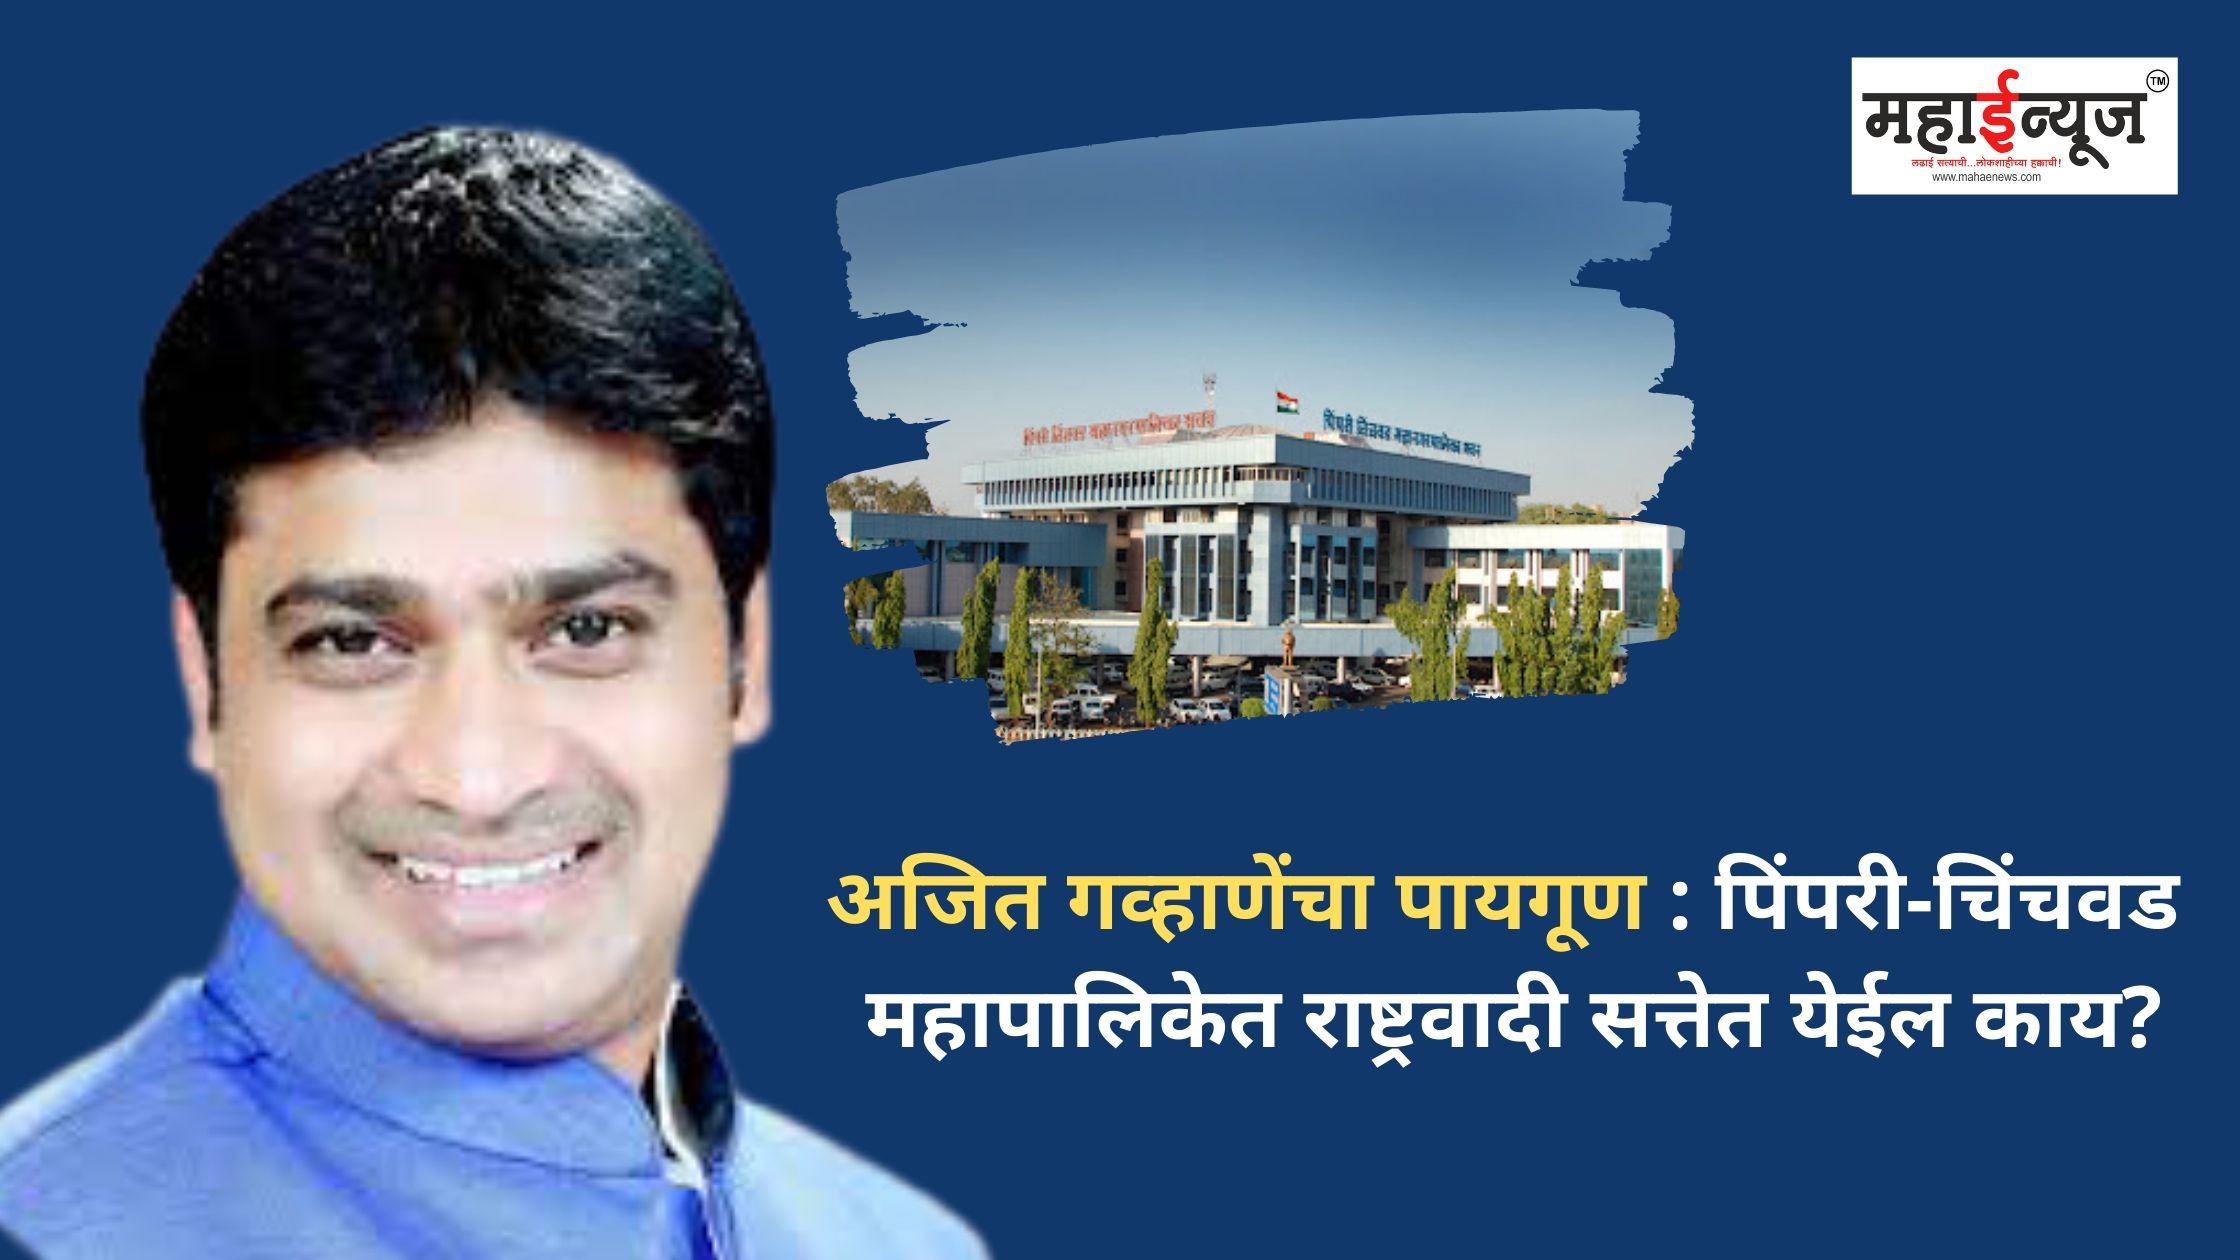 Ajit Gawhane's footsteps: Will NCP come to power in Pimpri-Chinchwad Municipal Corporation?